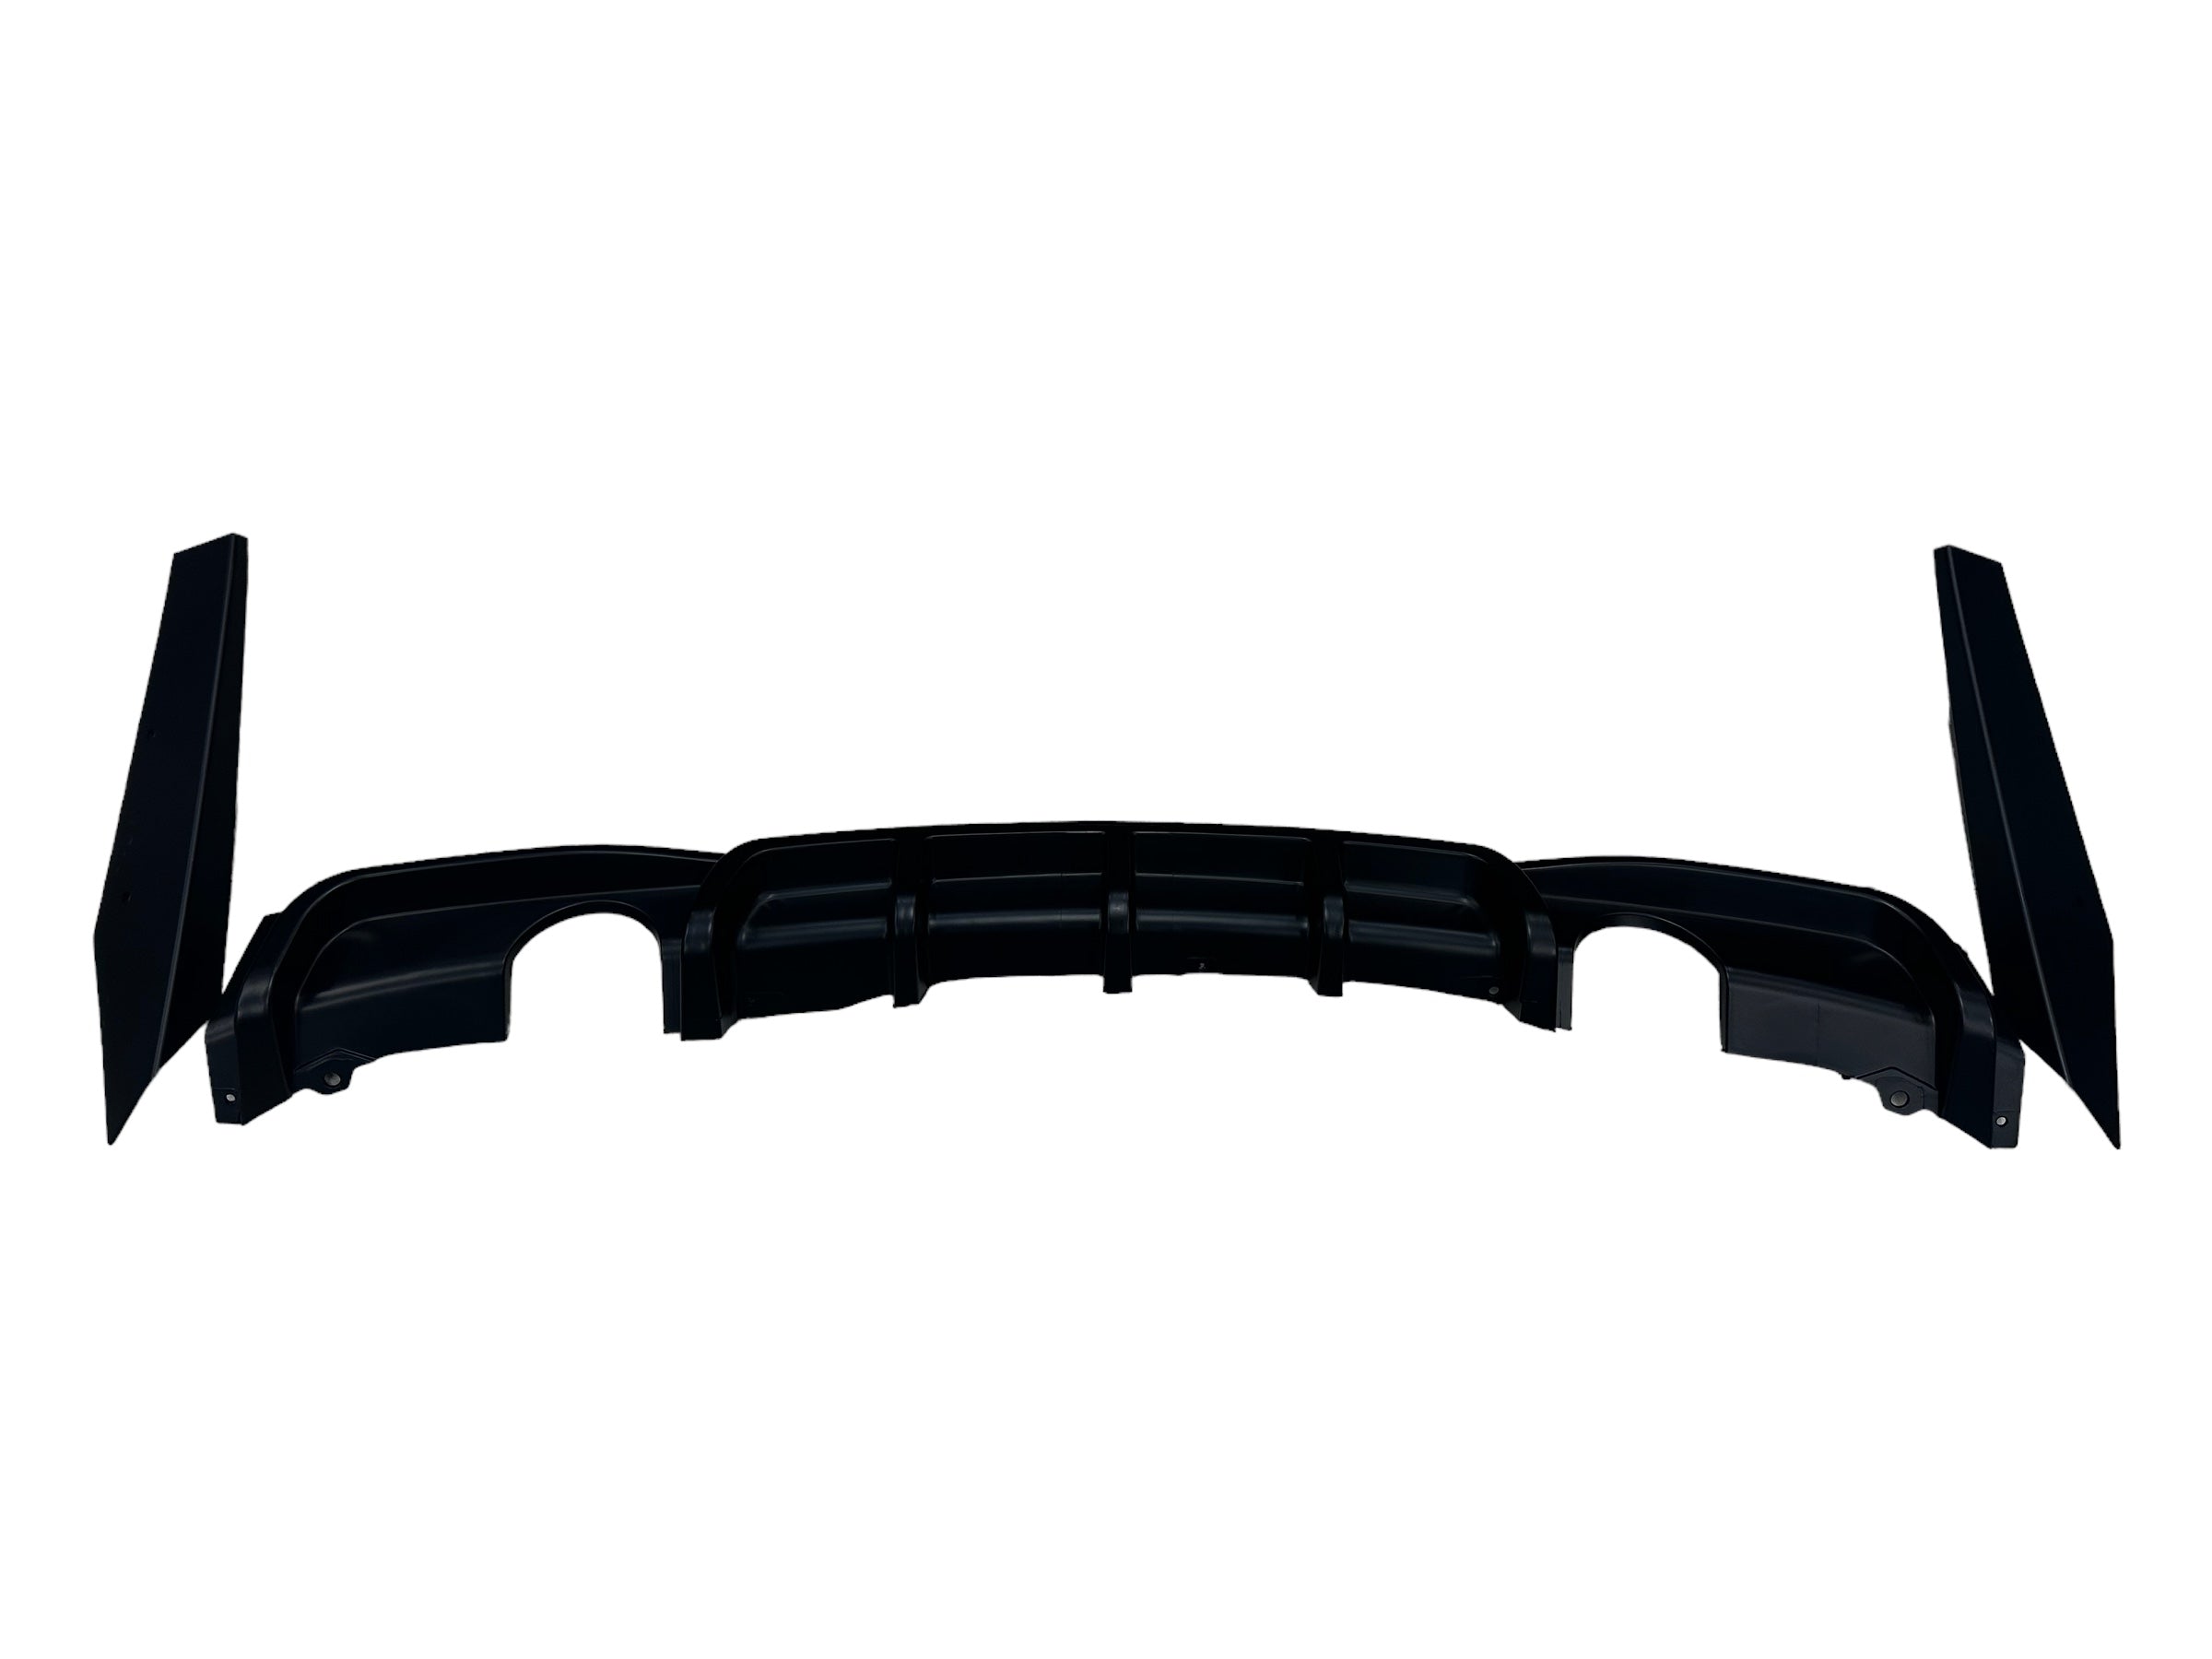 BMW F30 to F80 style rear diffuser